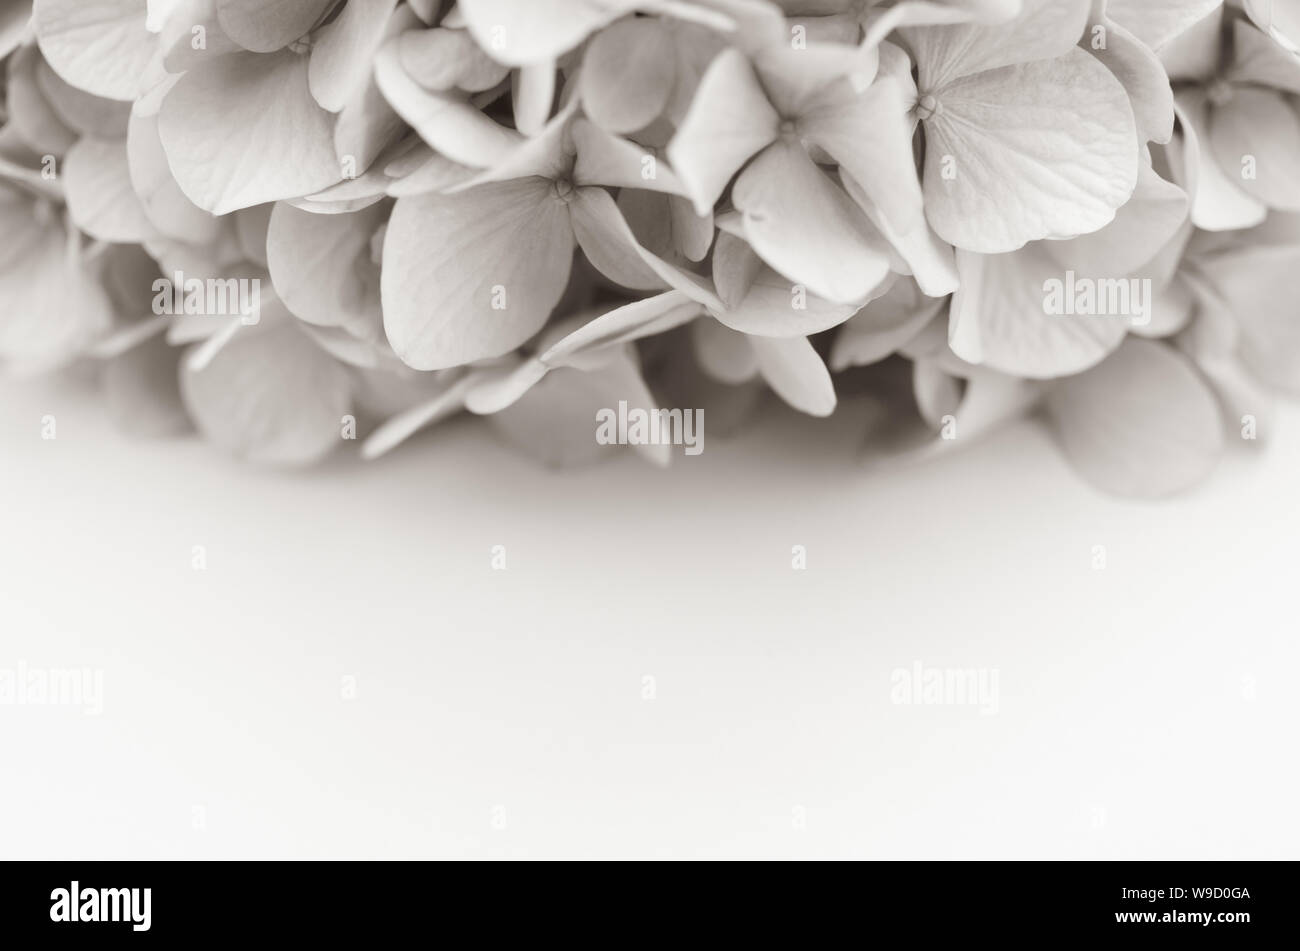 hydrangea flower head background with copy space Stock Photo